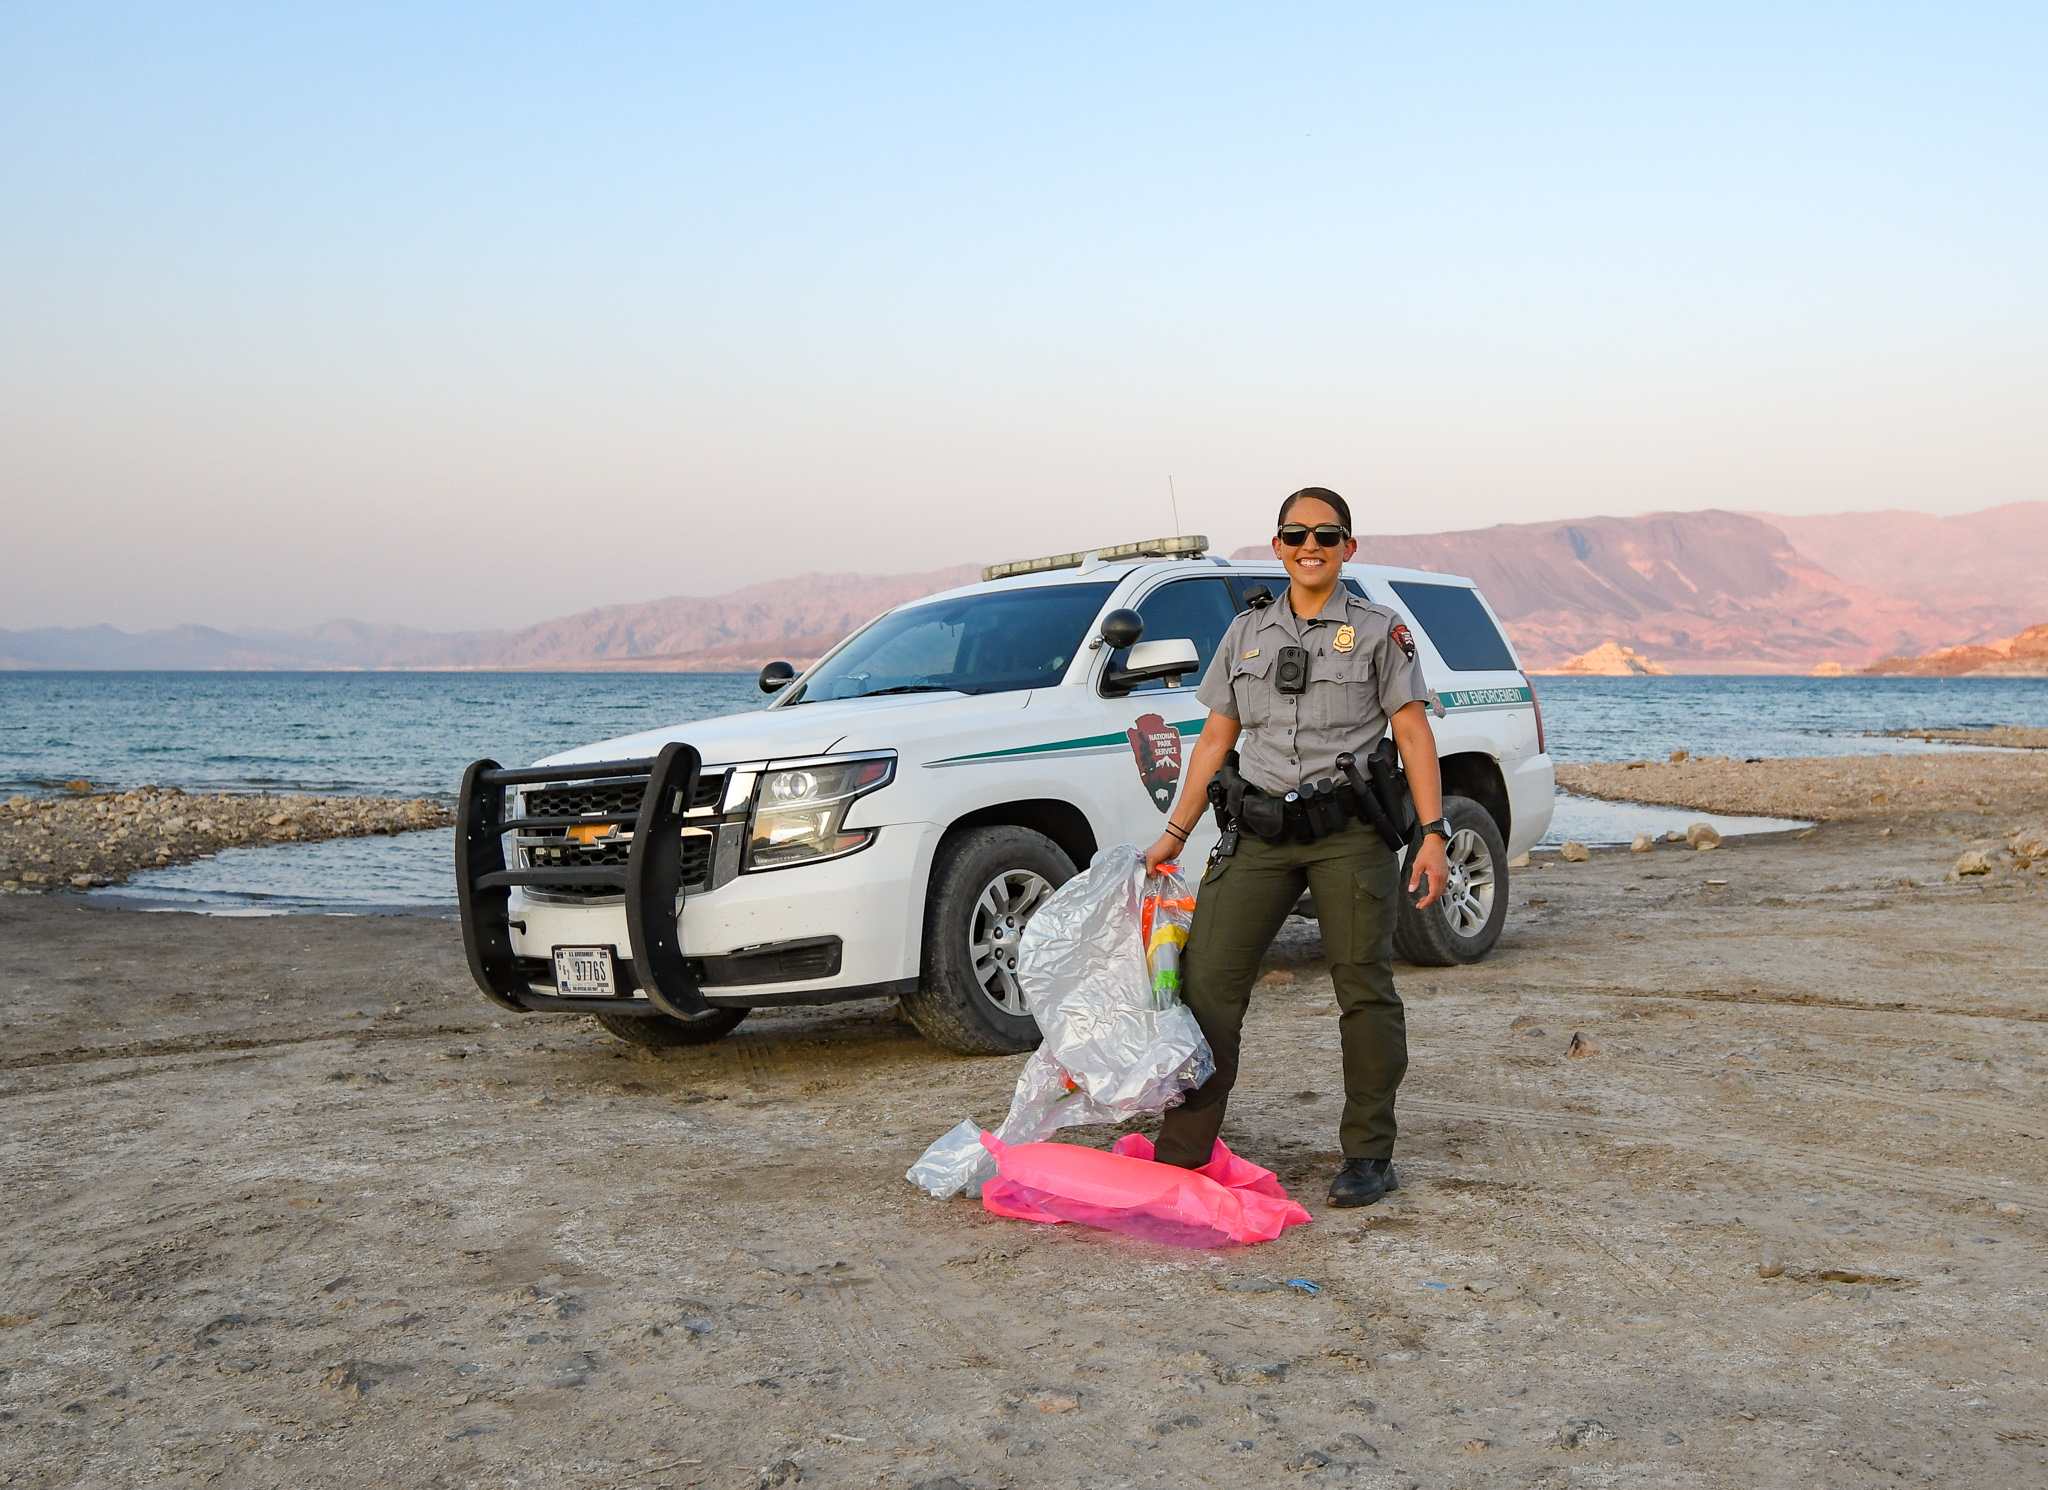 Park Ranger with pool floats